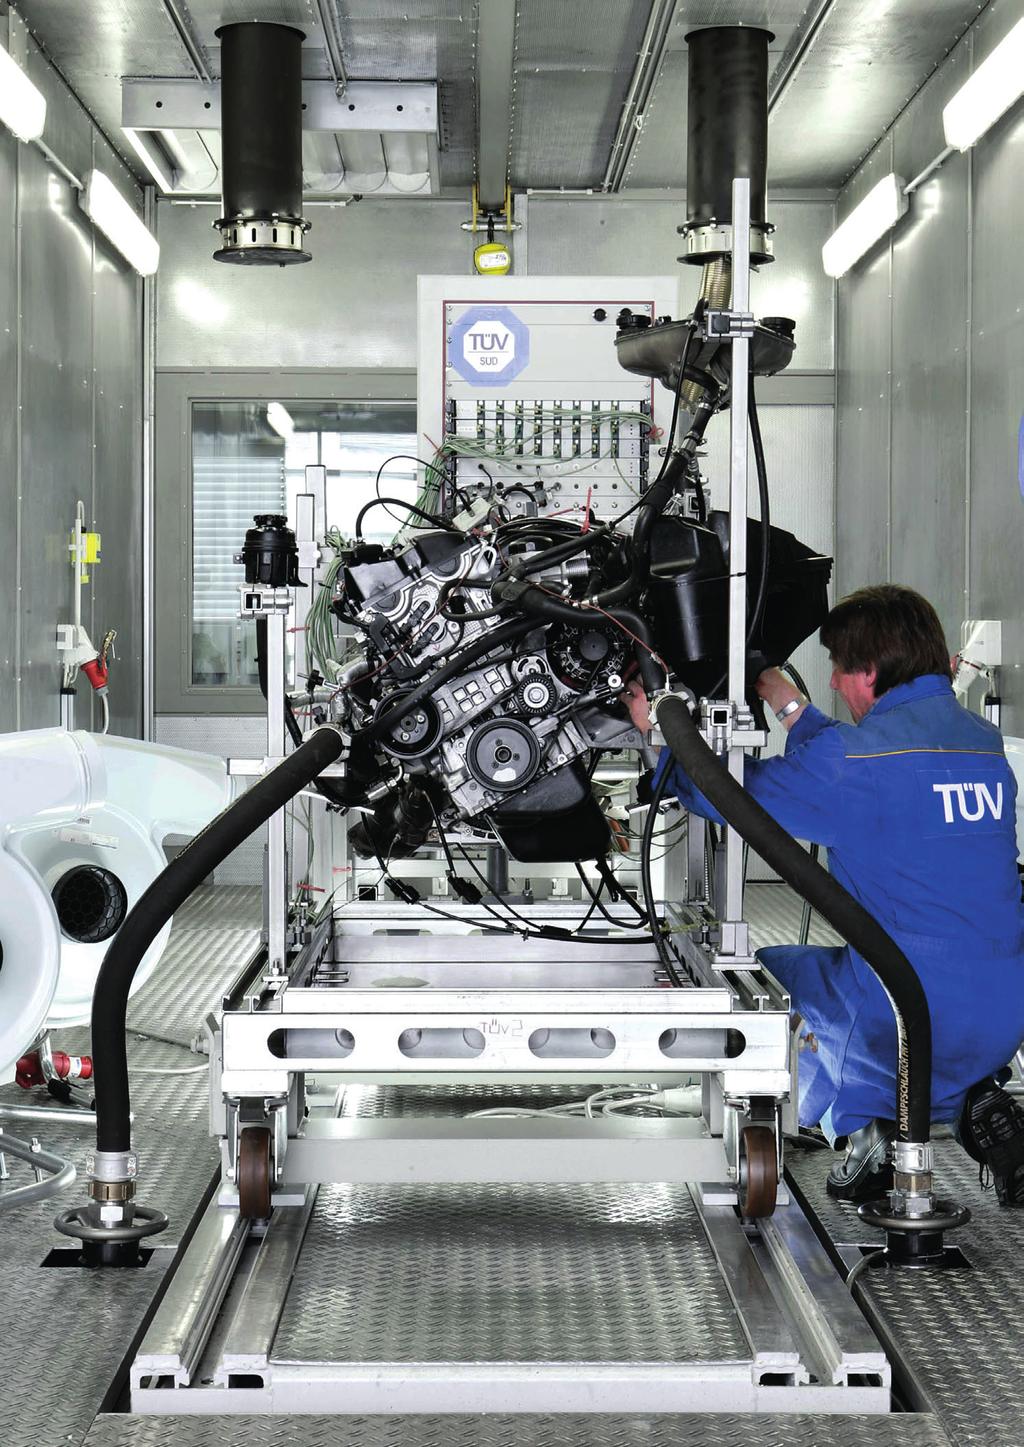 Over 800 locations in 40 countries globally TÜV SÜD s global automotive operations GLOBAL HEADQUARTERS: MUNICH, GERMANY Your business benefits Global support for all your operative needs We